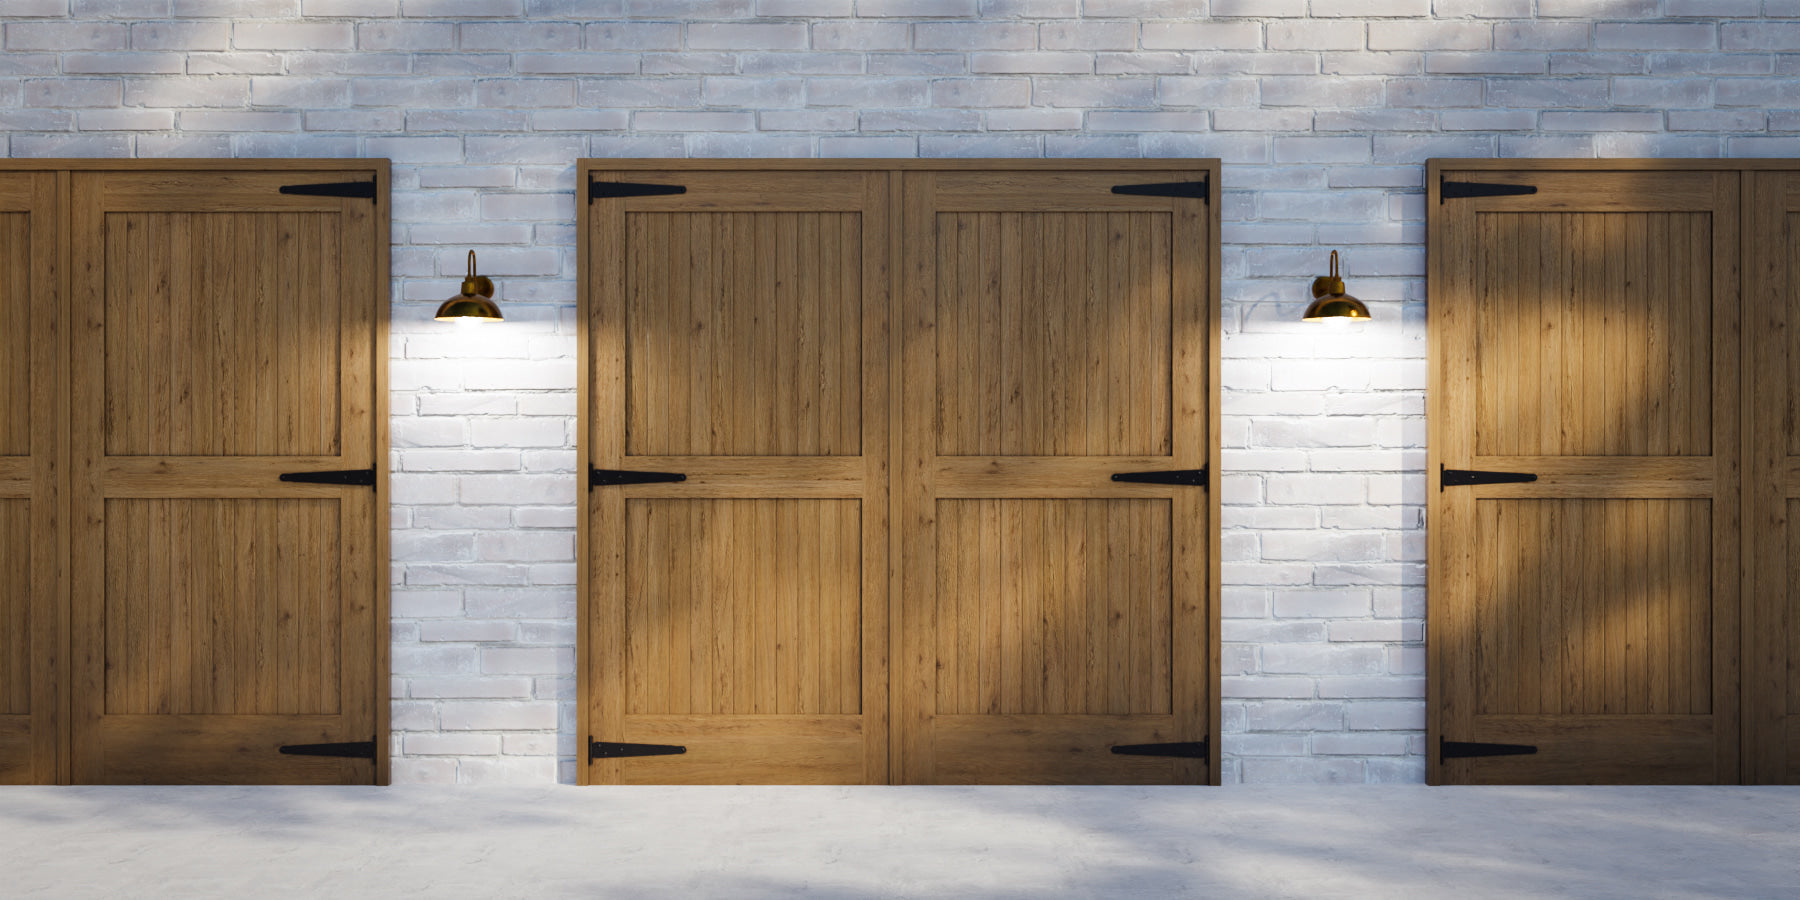 9 Common Questions About Wood Garage Doors, Answered